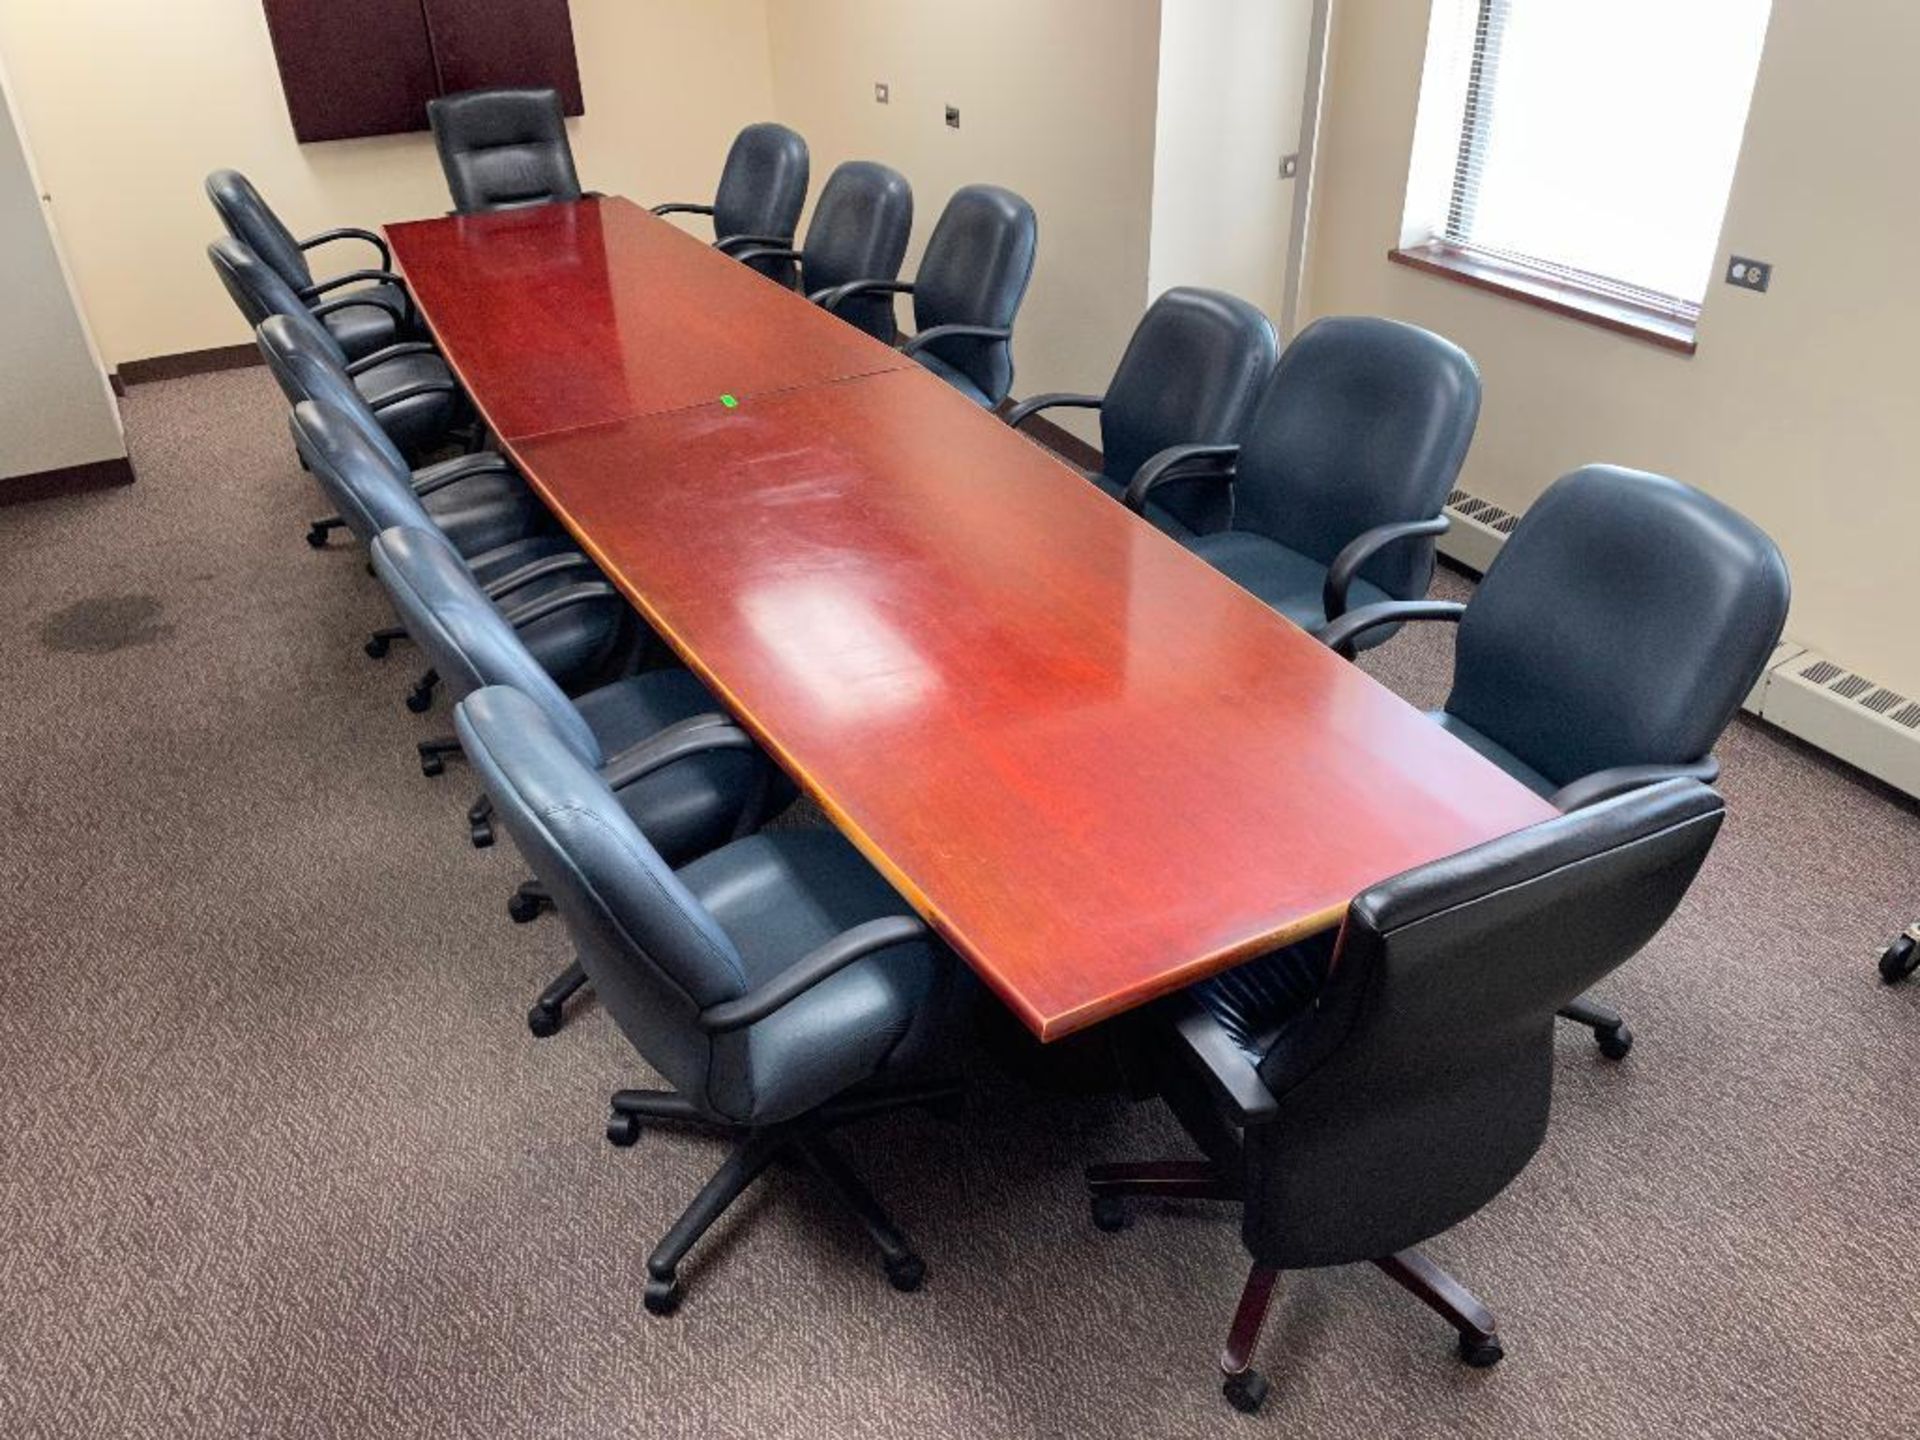 DESCRIPTION: 15 PC. COMPLETE CONFERENCE TABLE SET ADDITIONAL INFORMATION: TABLE AND 14 CHAIRS INCLUD - Image 2 of 6